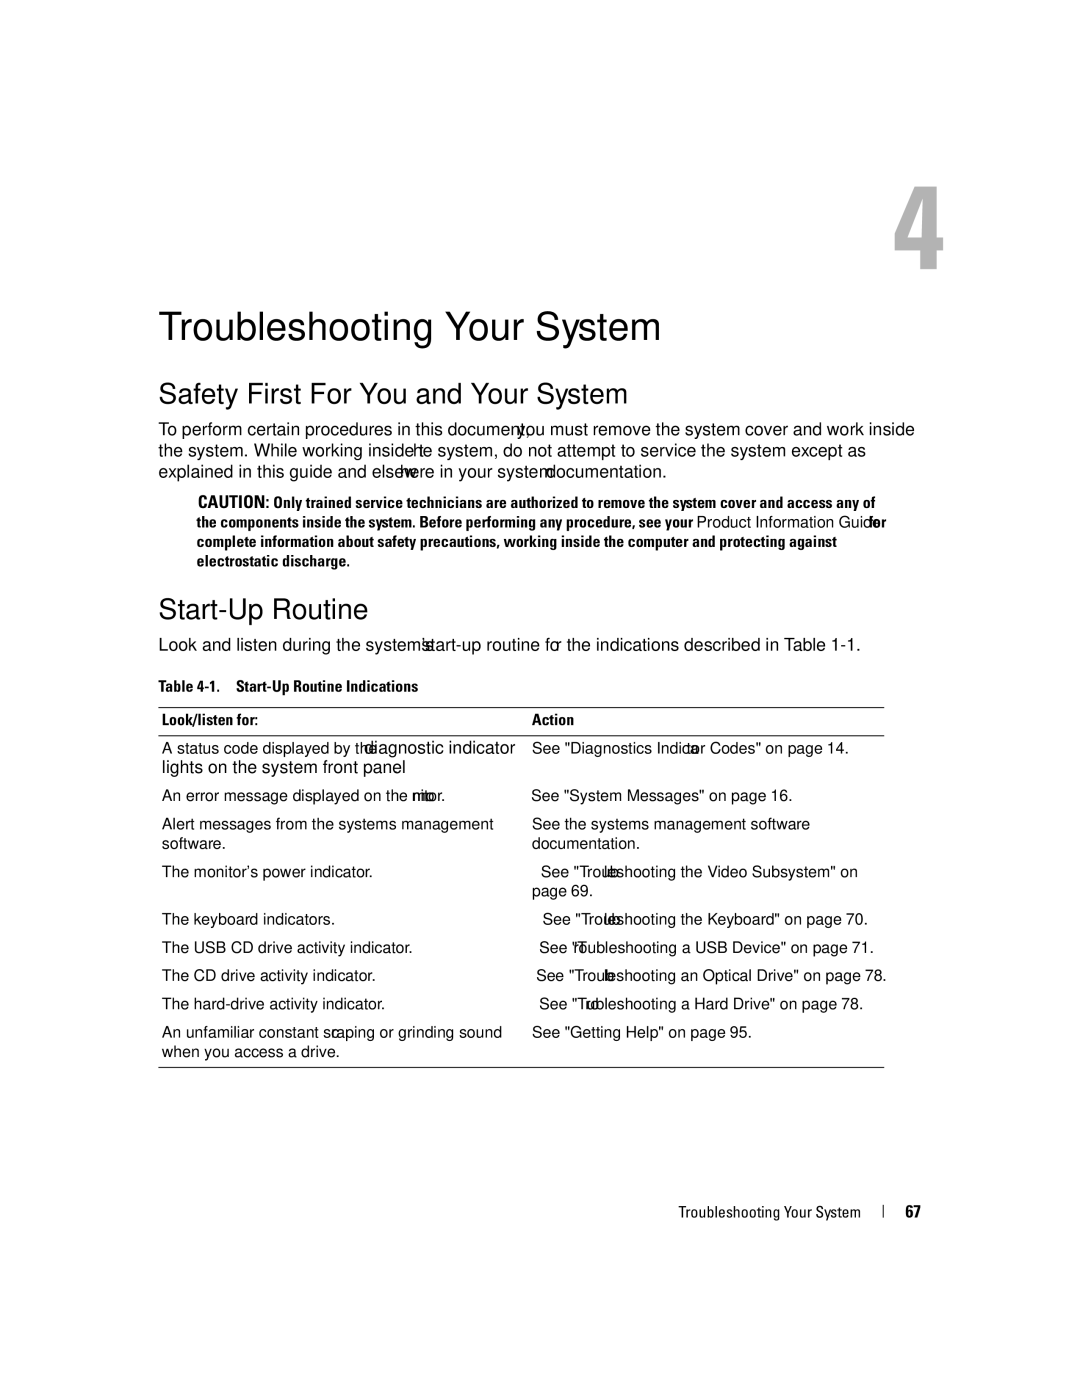 Dell SC1435 owner manual Safety First-For You and Your System, Start-Up Routine, Lights on the system front panel 